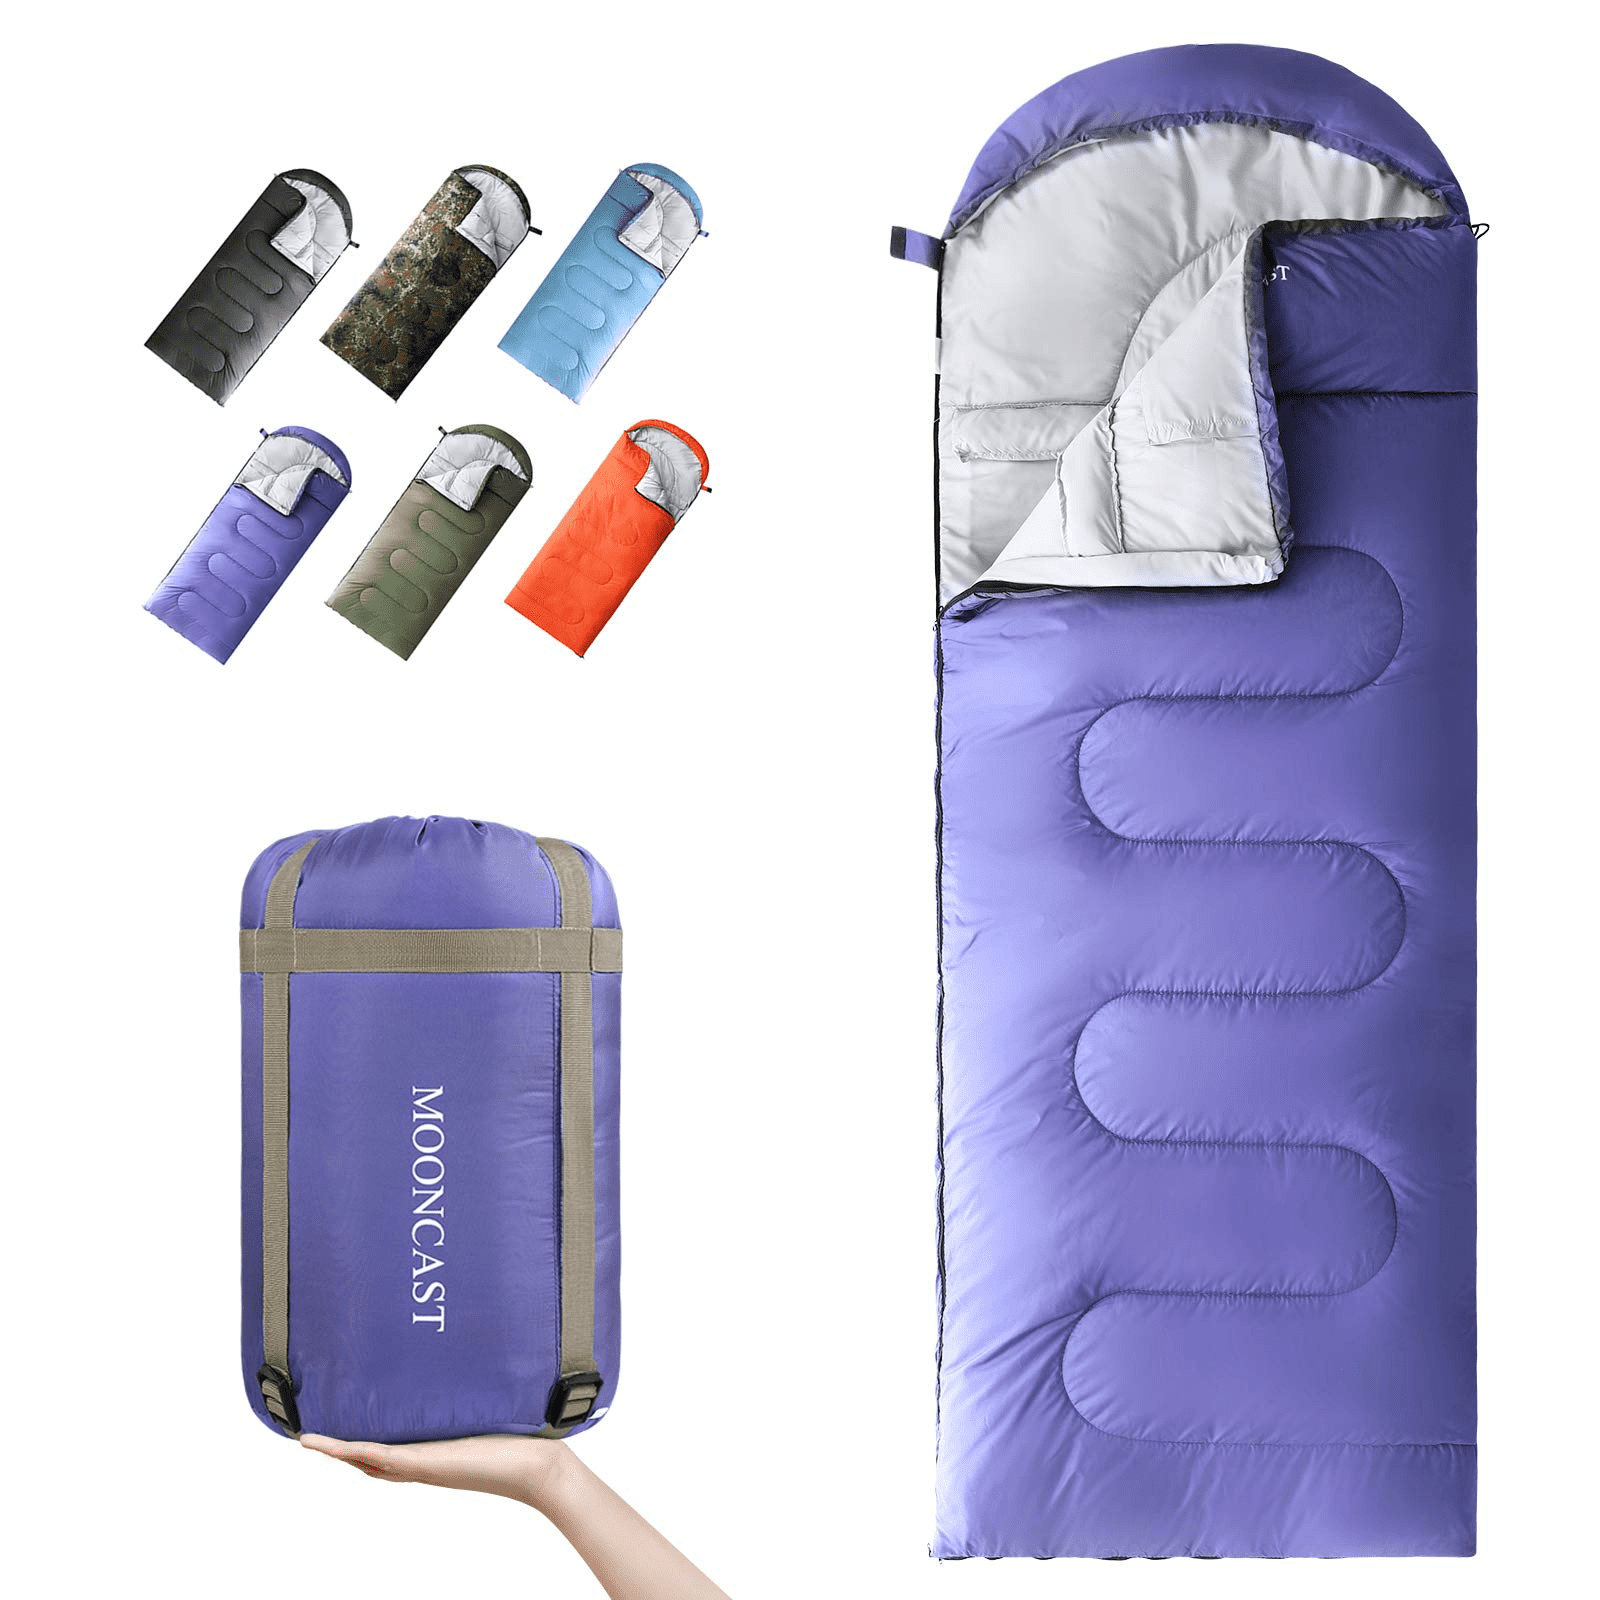 Lightweight Waterproof Sleeping Bag for Adults & Kids Camping Sleeping Bag Hiking Camping Traveling Music Festival and Outdoors 4 Season Warm & Cool Weather 